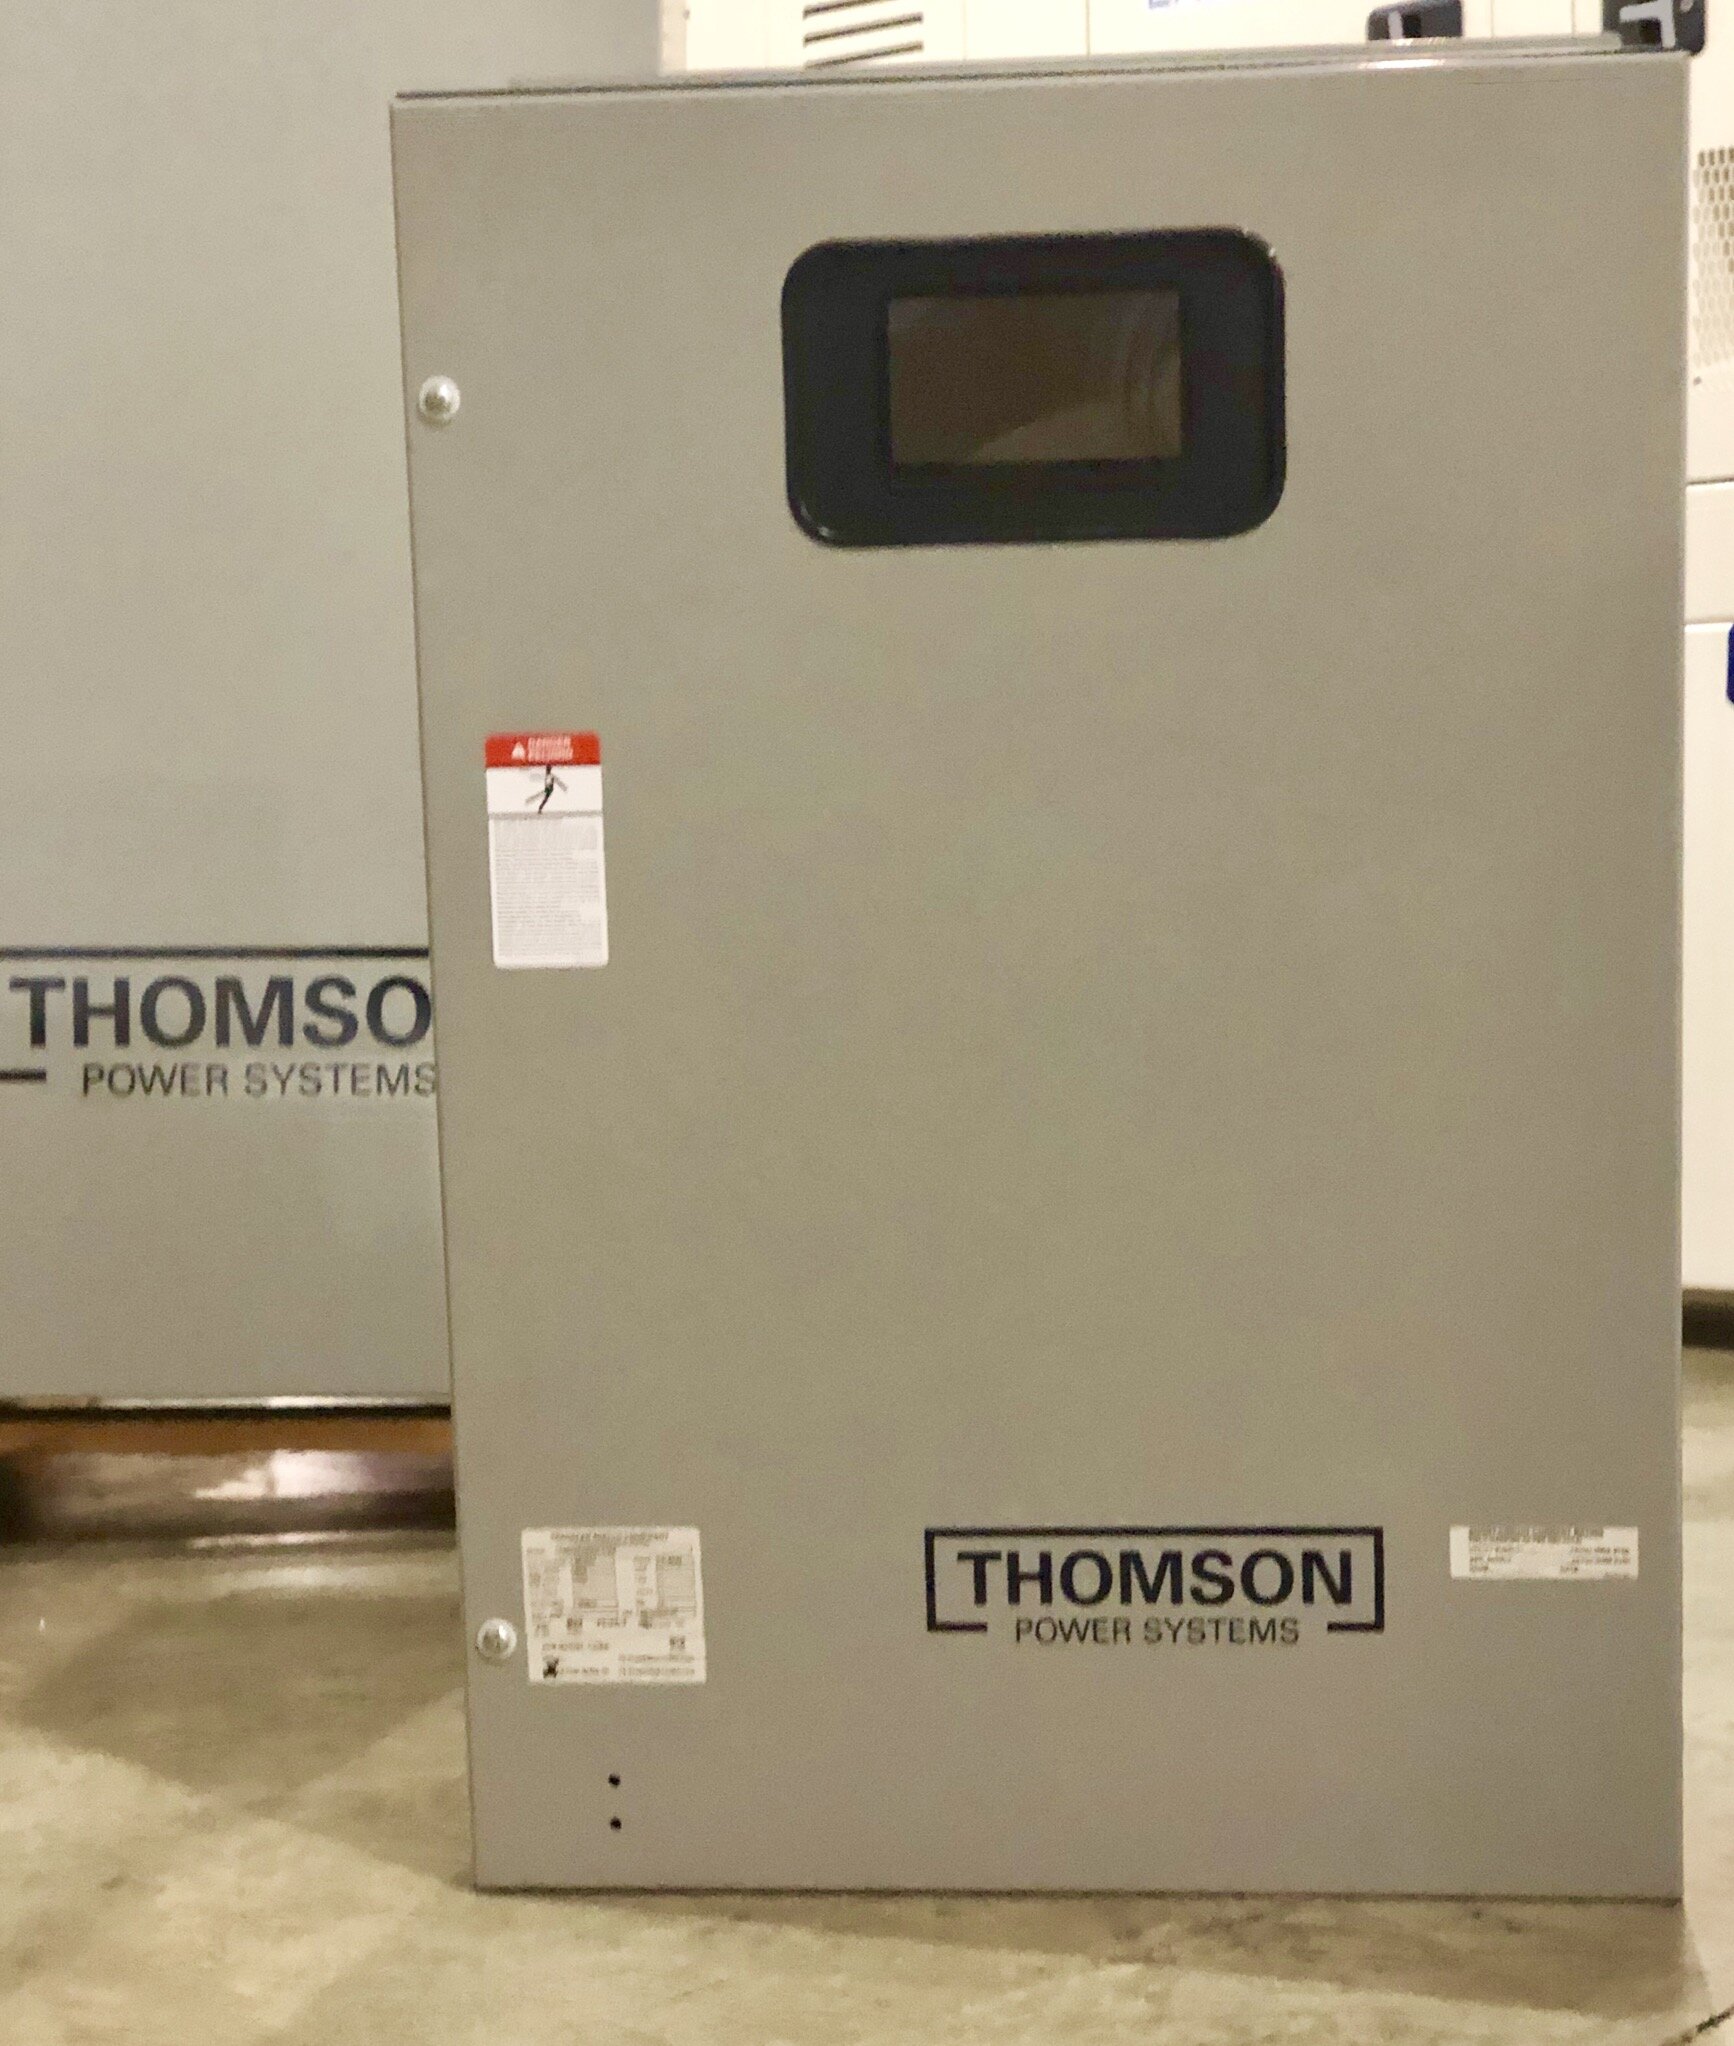 Thomson Power Systems manufactures a complete lineup of Automatic Transfer Switches